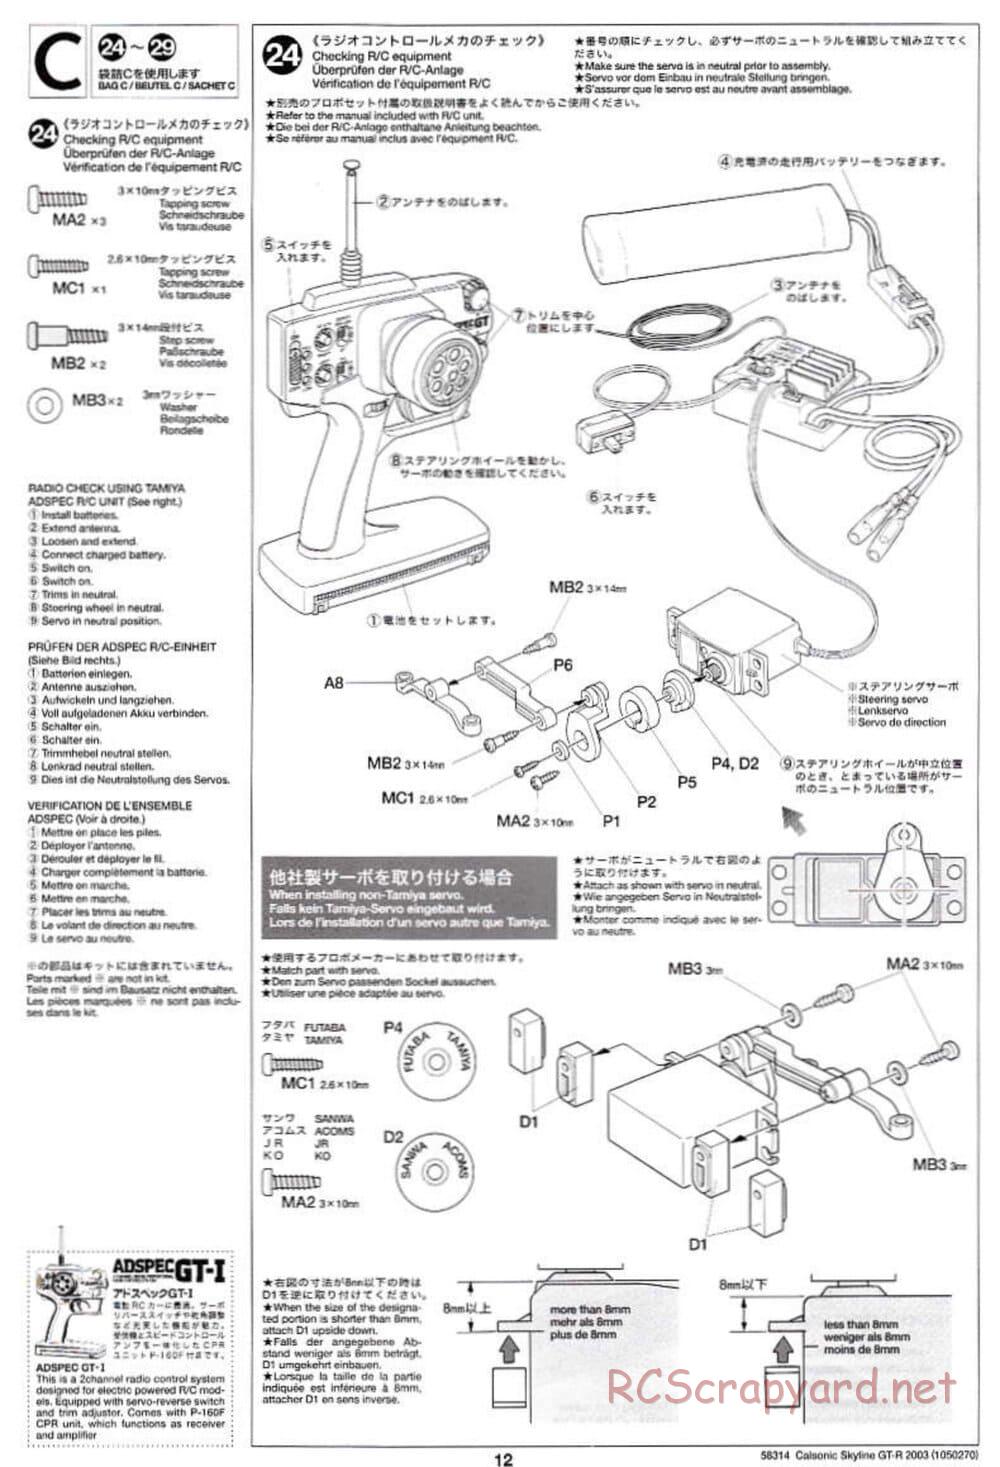 Tamiya - Calsonic Skyline GT-R 2003 - TT-01 Chassis - Manual - Page 12